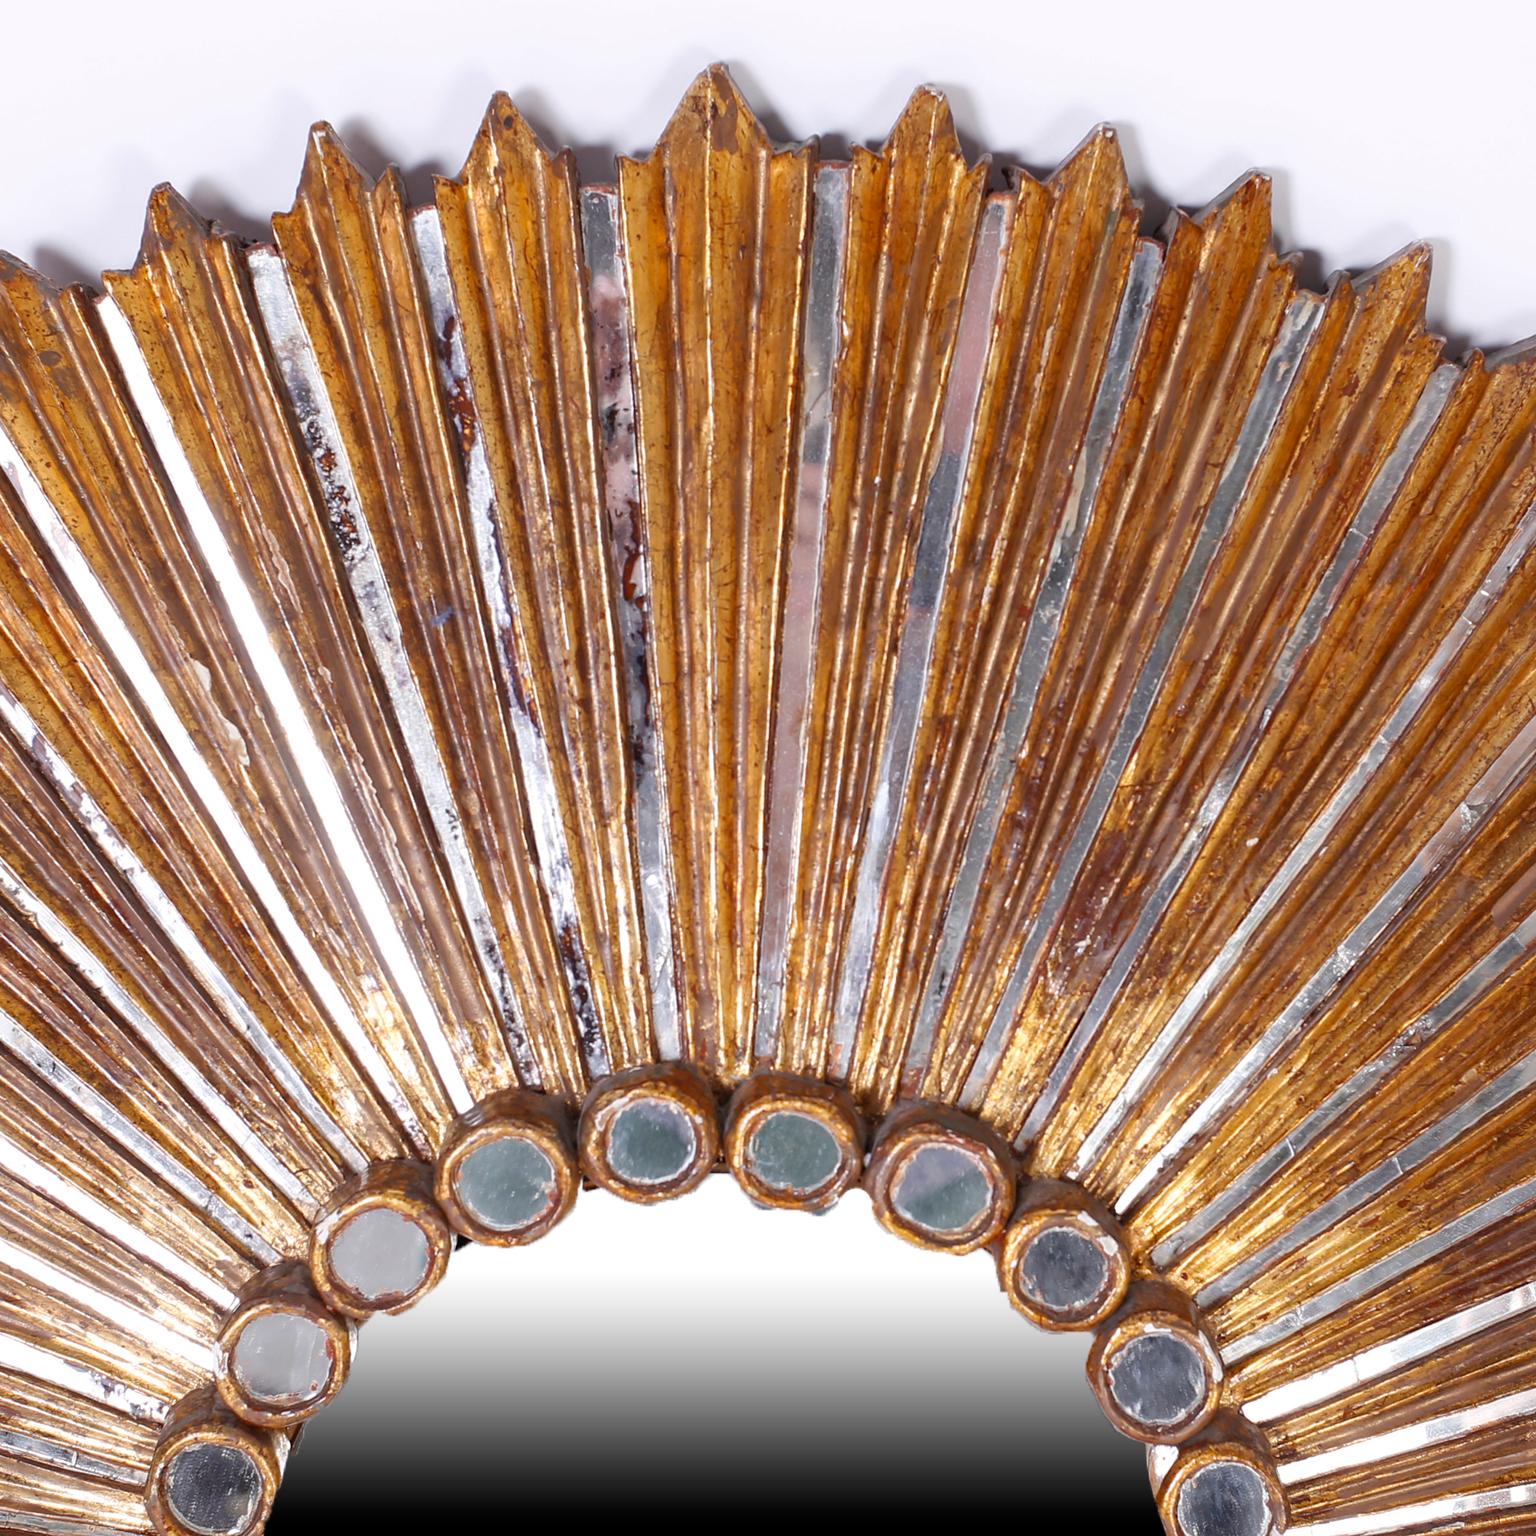 A beautiful large round carved and gilt sunburst mirror with great surface. Small mirrored panels alternate with giltwood rays, around a central mirror. The mirrored panels showing signs of age and wear. A great decorative statement.

  